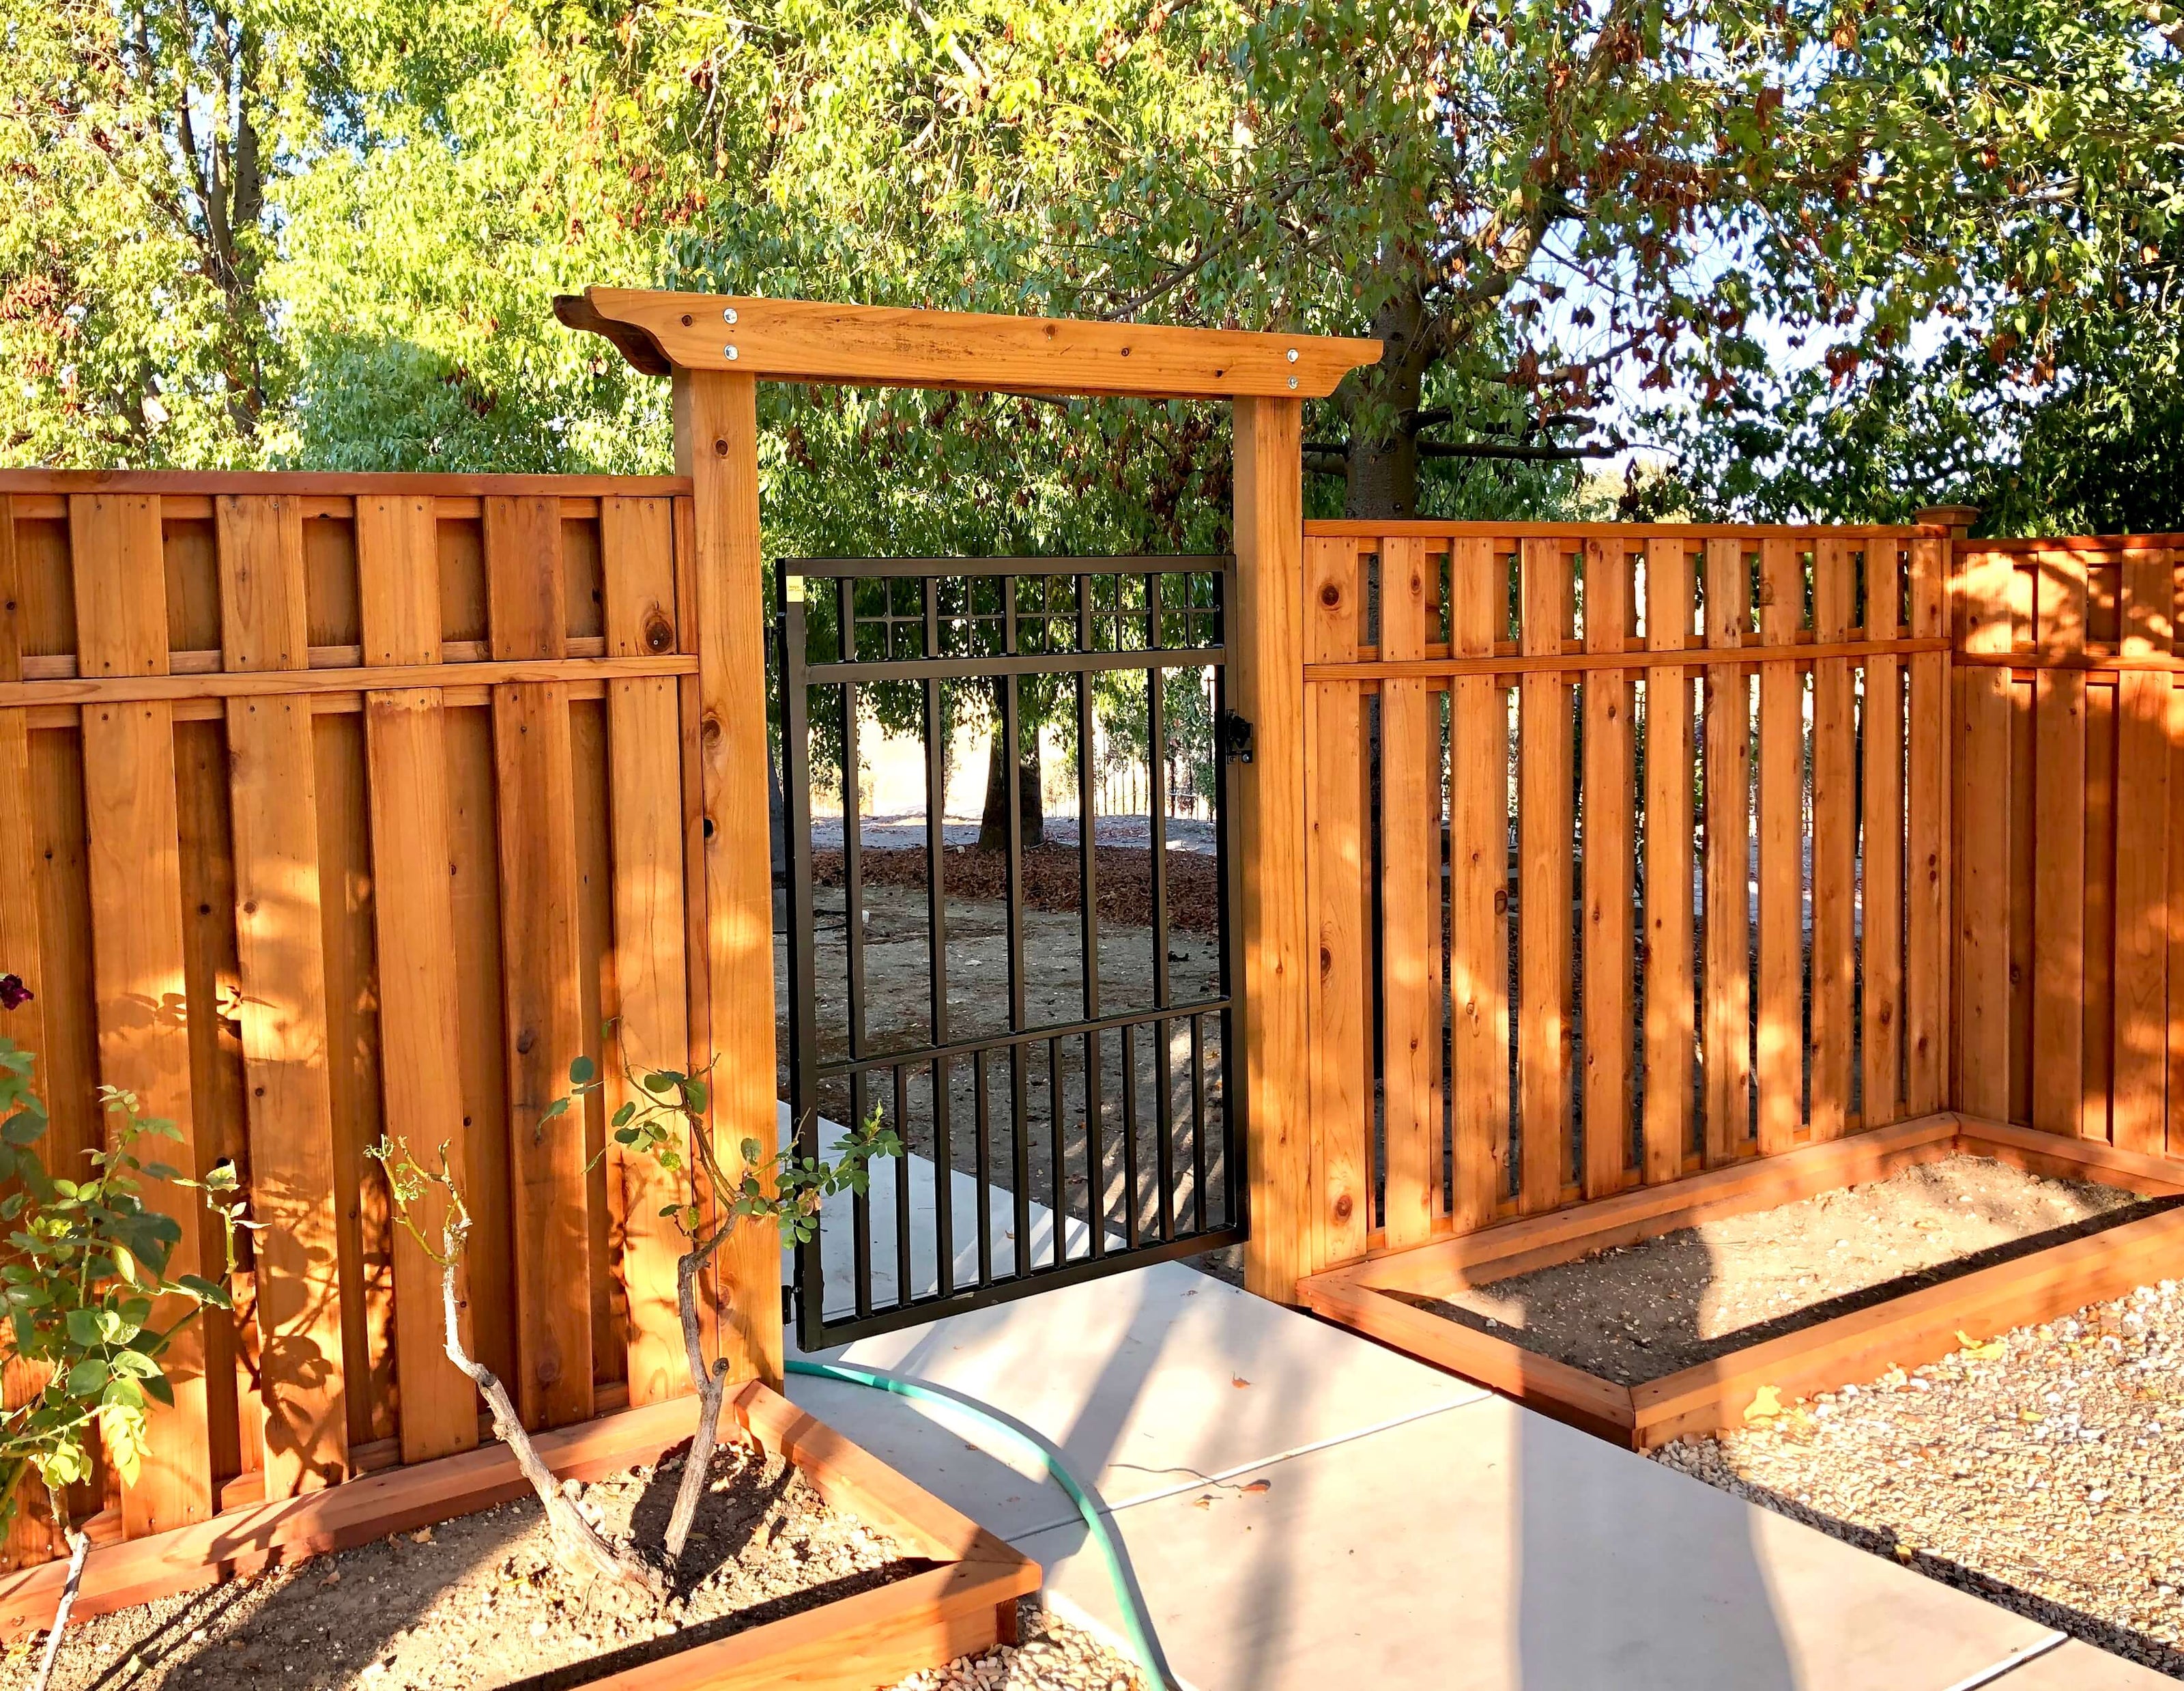 geometric wrought iron garden gate set in craftsman style wood fence stained redwood with arbor